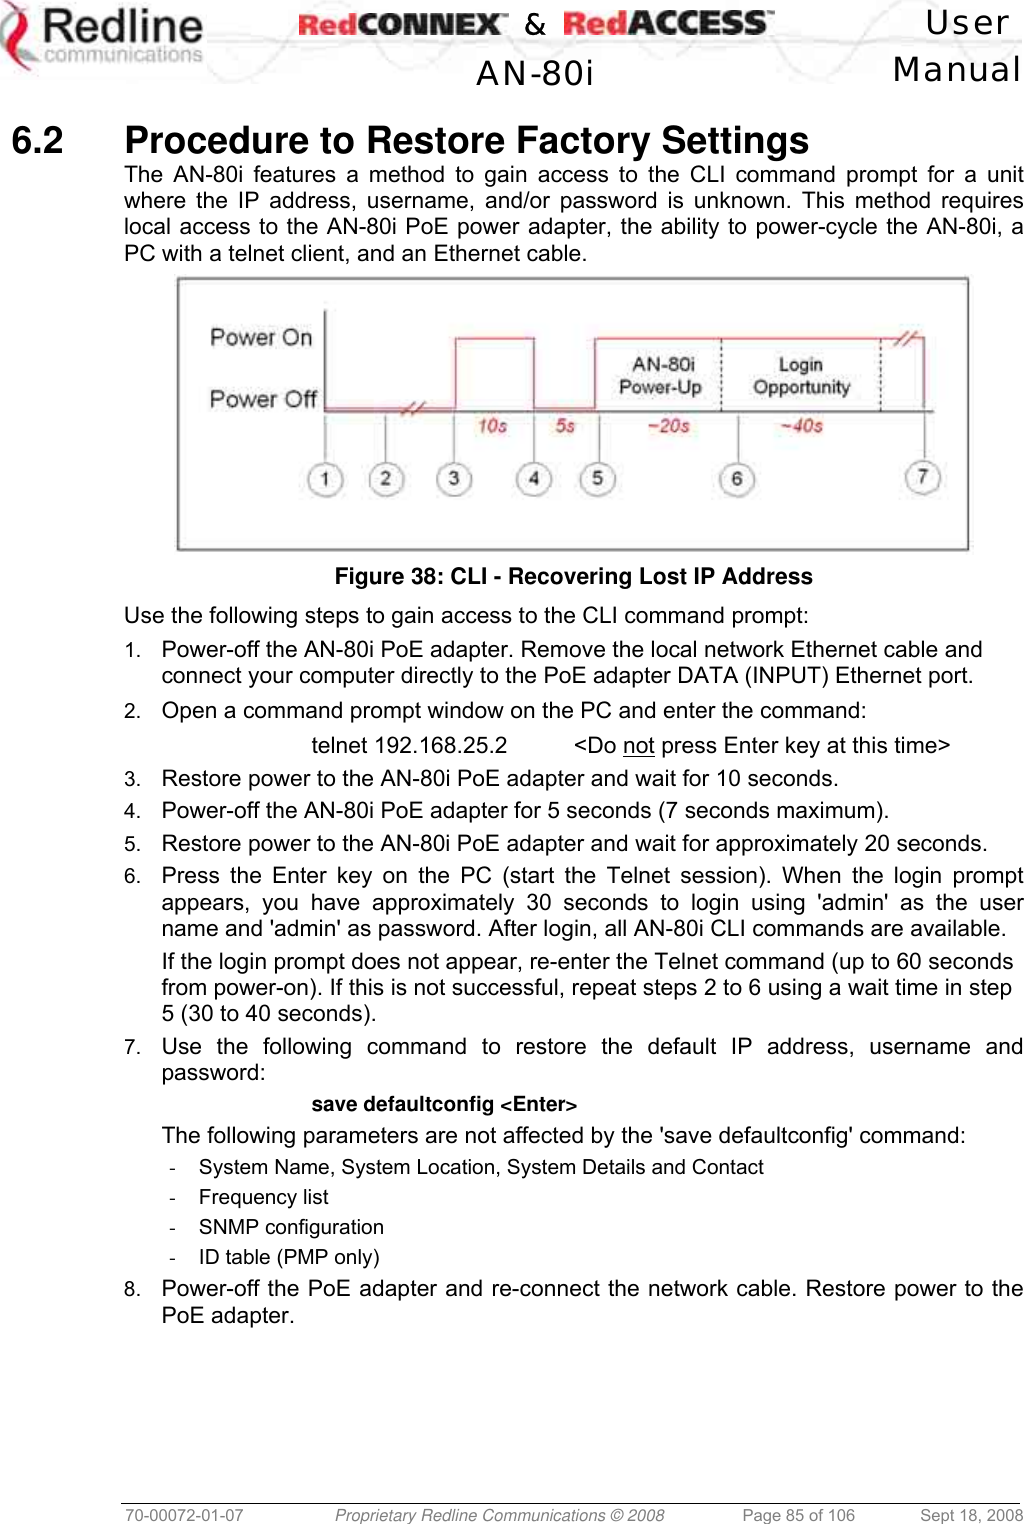    &amp;  User  AN-80i Manual  70-00072-01-07  Proprietary Redline Communications © 2008  Page 85 of 106  Sept 18, 2008  6.2  Procedure to Restore Factory Settings The AN-80i features a method to gain access to the CLI command prompt for a unit where the IP address, username, and/or password is unknown. This method requires local access to the AN-80i PoE power adapter, the ability to power-cycle the AN-80i, a PC with a telnet client, and an Ethernet cable.   Figure 38: CLI - Recovering Lost IP Address Use the following steps to gain access to the CLI command prompt: 1.  Power-off the AN-80i PoE adapter. Remove the local network Ethernet cable and connect your computer directly to the PoE adapter DATA (INPUT) Ethernet port. 2.  Open a command prompt window on the PC and enter the command:   telnet 192.168.25.2  &lt;Do not press Enter key at this time&gt; 3.  Restore power to the AN-80i PoE adapter and wait for 10 seconds. 4.  Power-off the AN-80i PoE adapter for 5 seconds (7 seconds maximum). 5.  Restore power to the AN-80i PoE adapter and wait for approximately 20 seconds. 6.  Press the Enter key on the PC (start the Telnet session). When the login prompt appears, you have approximately 30 seconds to login using &apos;admin&apos; as the user name and &apos;admin&apos; as password. After login, all AN-80i CLI commands are available. If the login prompt does not appear, re-enter the Telnet command (up to 60 seconds from power-on). If this is not successful, repeat steps 2 to 6 using a wait time in step 5 (30 to 40 seconds). 7.  Use the following command to restore the default IP address, username and password:   save defaultconfig &lt;Enter&gt; The following parameters are not affected by the &apos;save defaultconfig&apos; command:   -  System Name, System Location, System Details and Contact -  Frequency list -  SNMP configuration -  ID table (PMP only) 8.  Power-off the PoE adapter and re-connect the network cable. Restore power to the PoE adapter.  